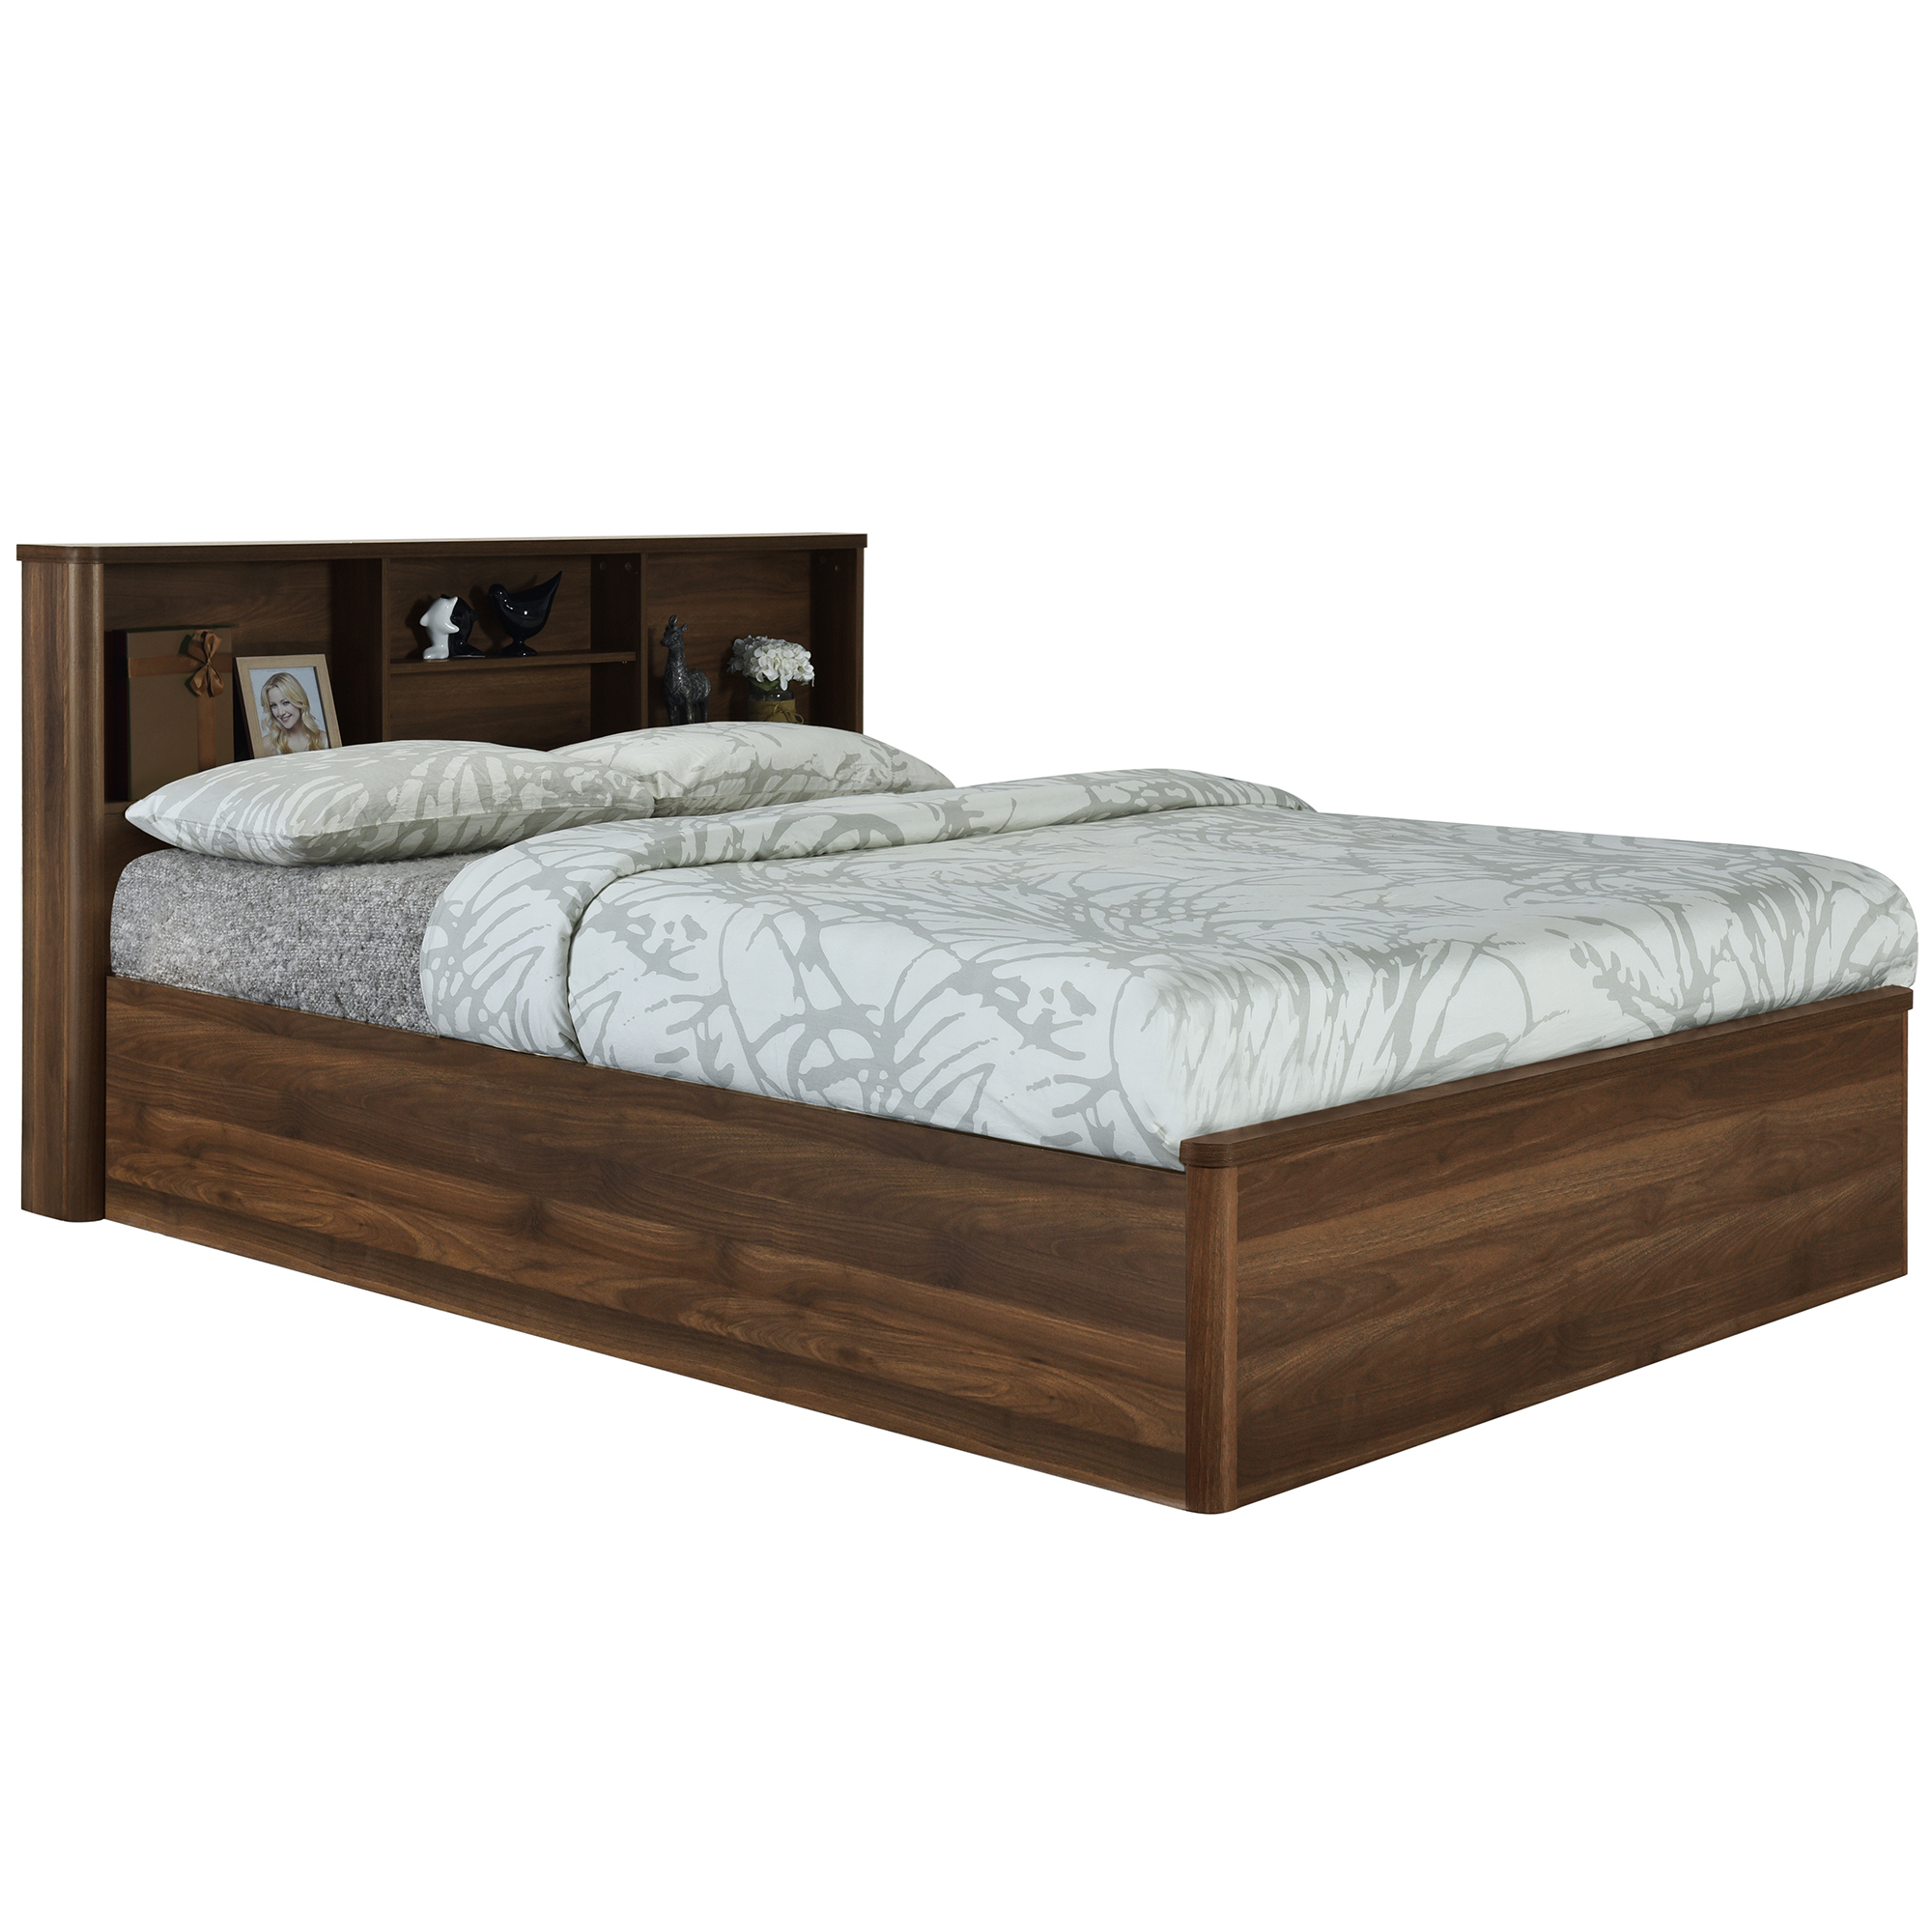 Kodu Anderson Queen Bed With Bookcase, Bed Frame With Headboard Storage Queen